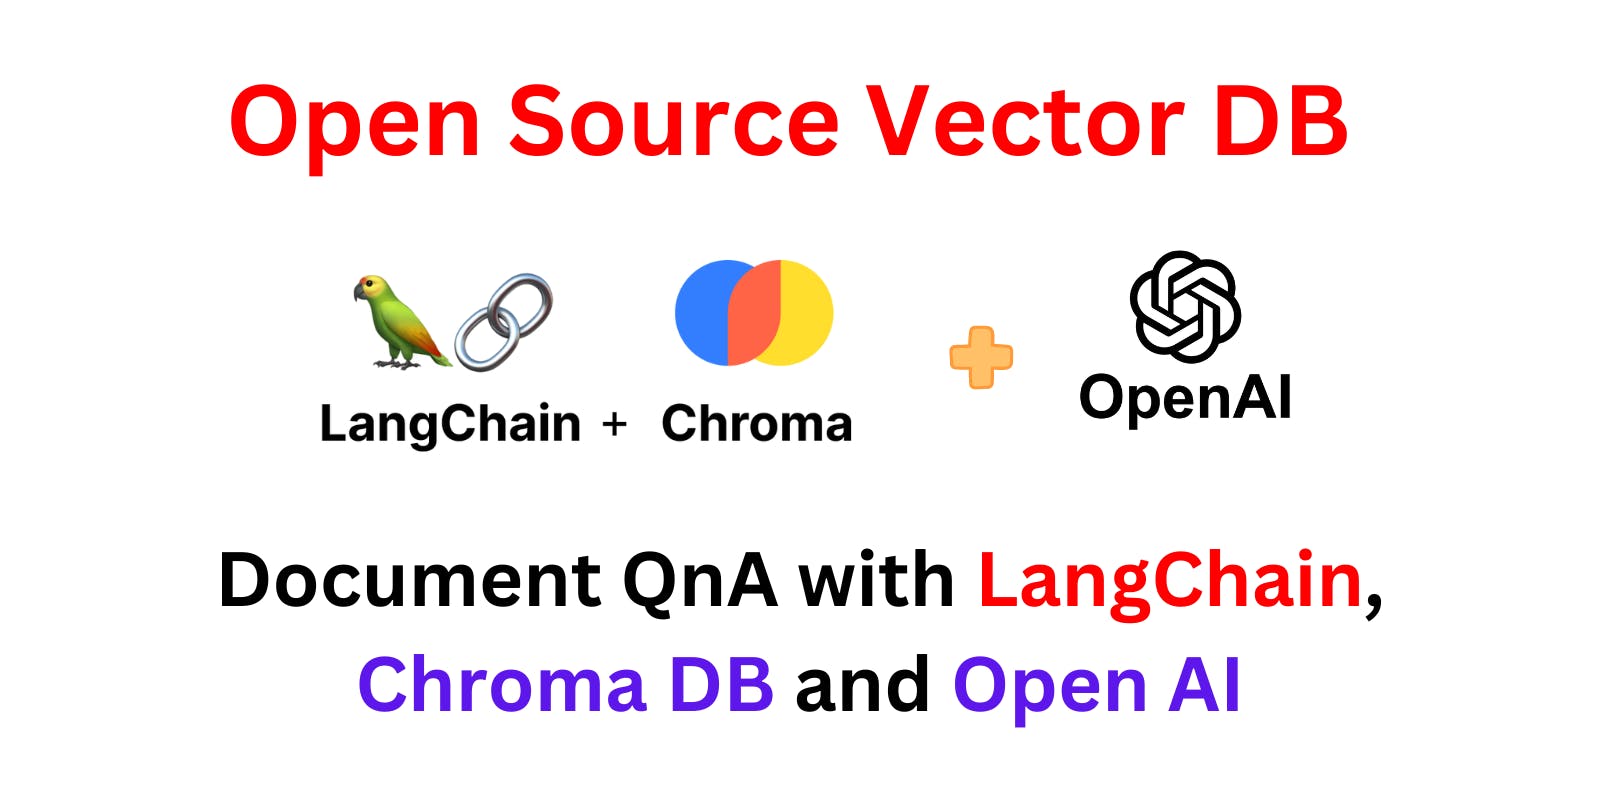 Using Langchain and Open Source Vector DB Chroma for Semantic Search with OpenAI's LLM